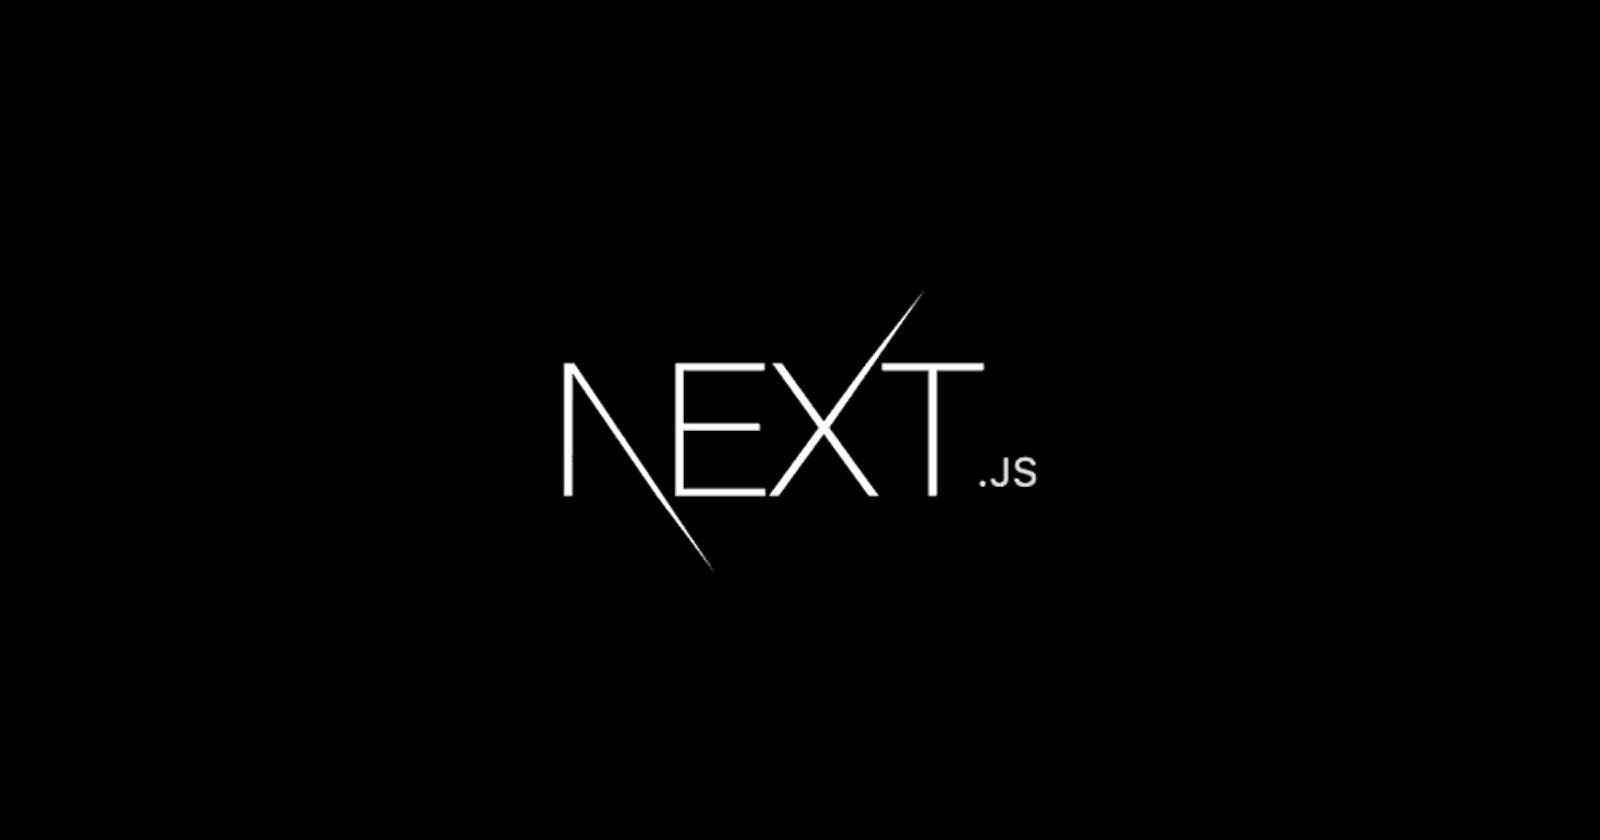 Getting started with Next.js: A step-by-step guide for beginners